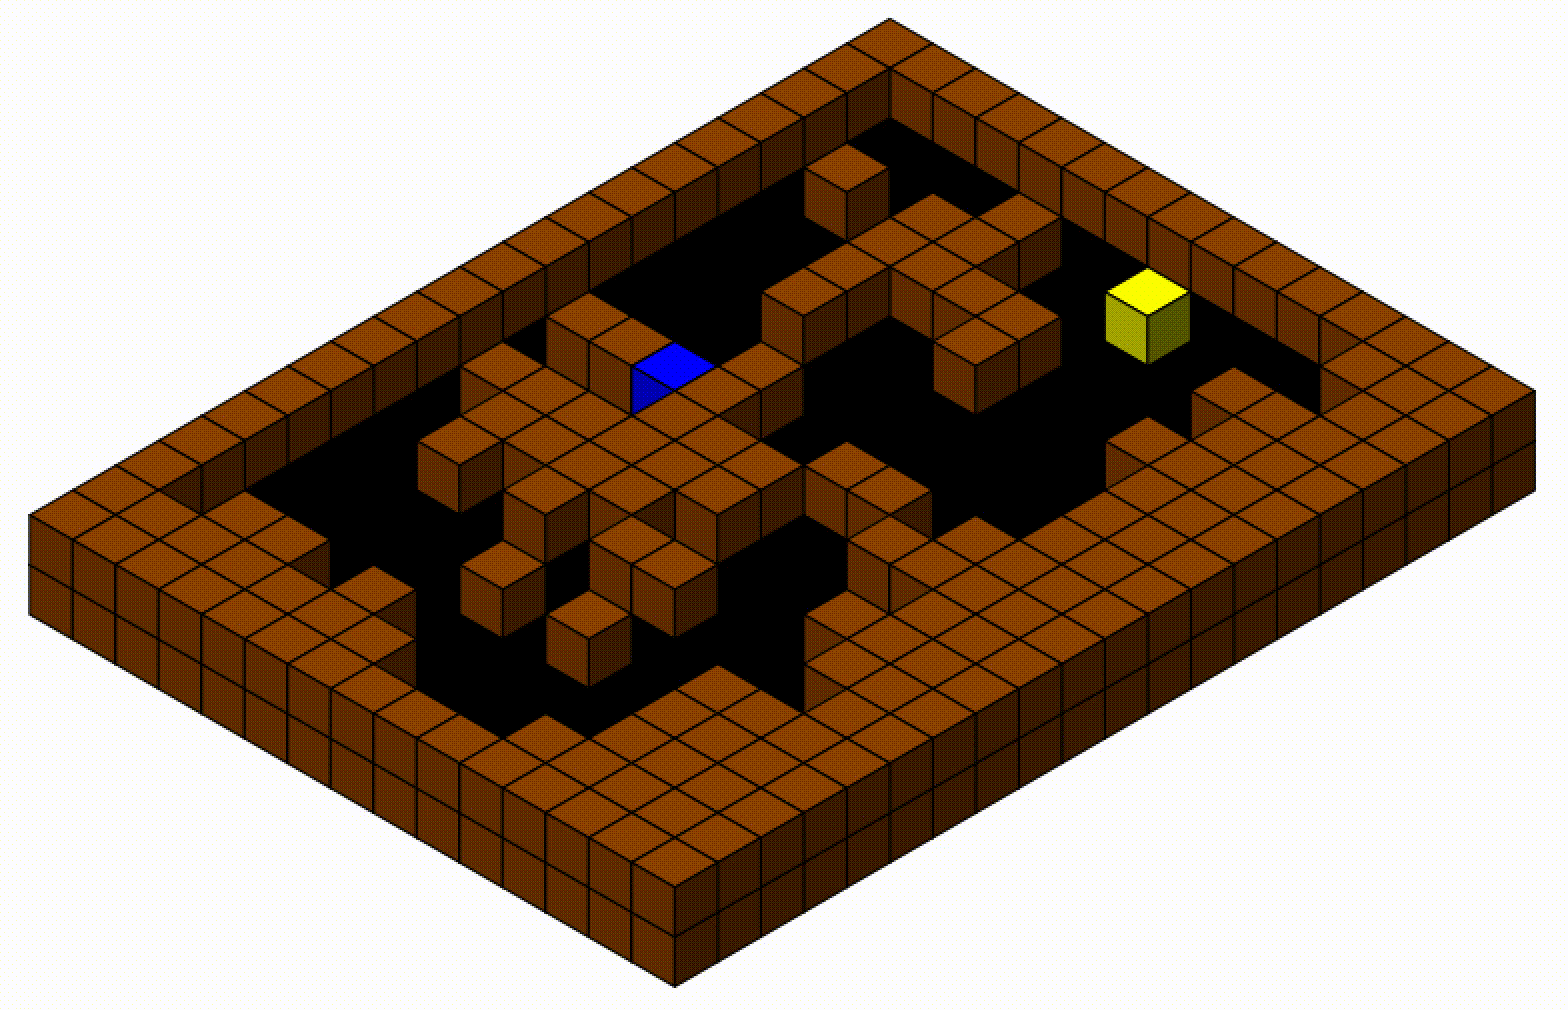 Gif of an R graphics window showing a tiled dungeon space made of isometric cubes. A user is controlling the movement of a blue cube around the black floor within the brown walls. A yellow cube chases the player around, narrowing the distance over time. When the enemy and player inhabit the same tile, they fuse to become a green cube that moves around as a single entity.